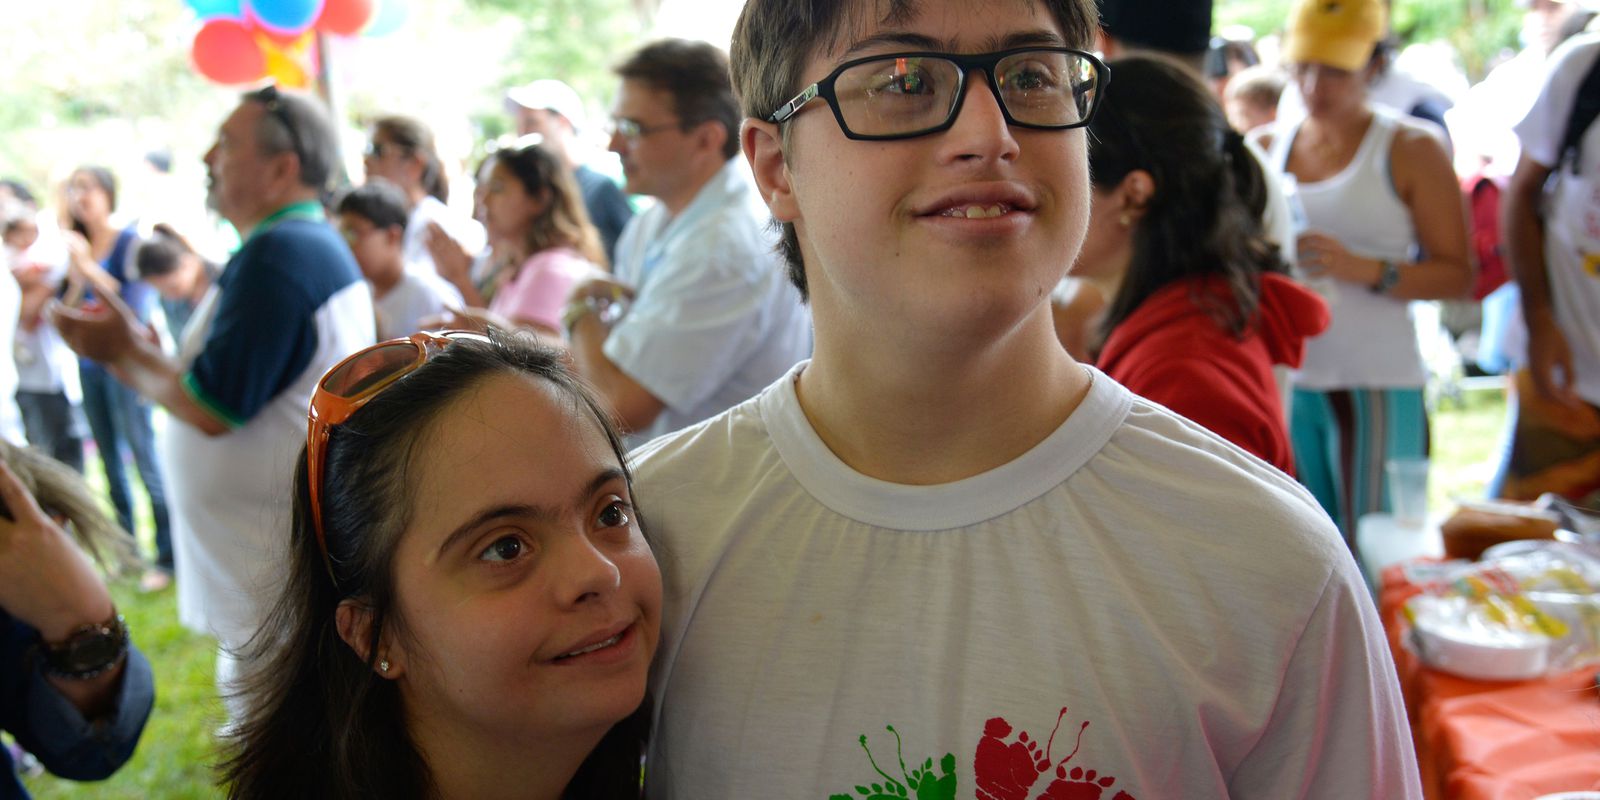 Today is the Day: week brings International Down Syndrome Day